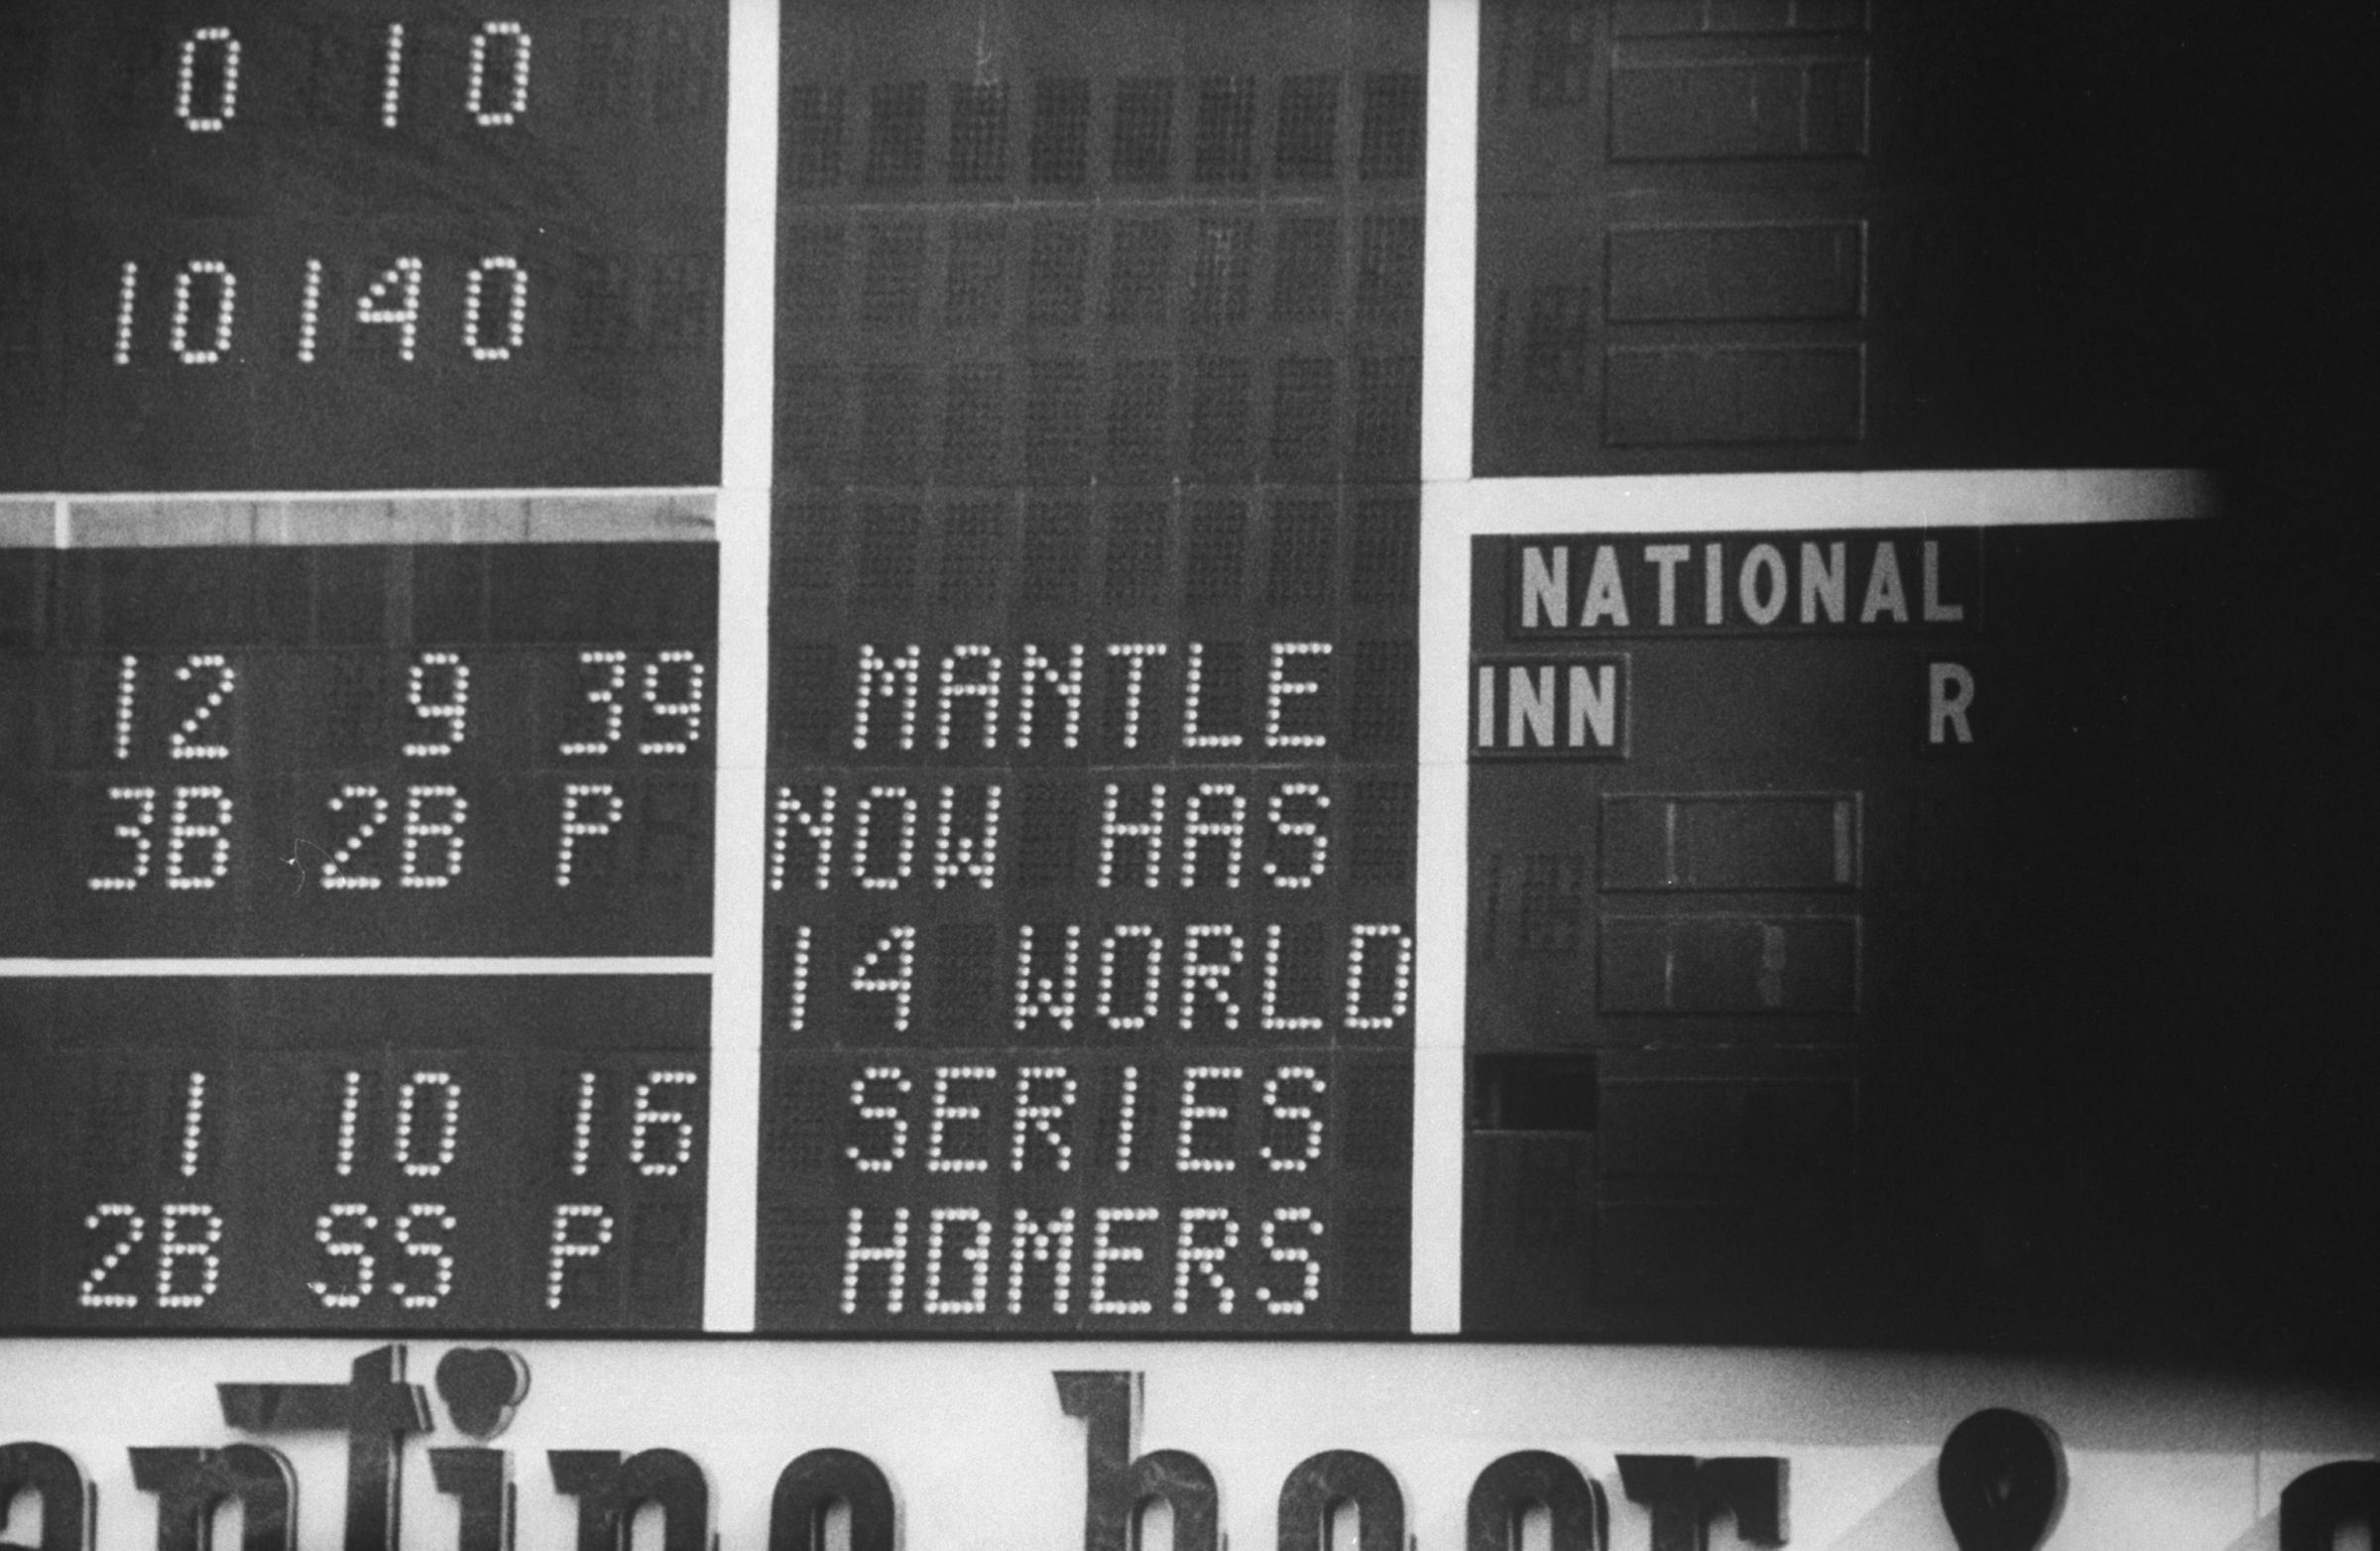 Score board reading "Mantle Now Has 14 World Series Homers," October 1960.